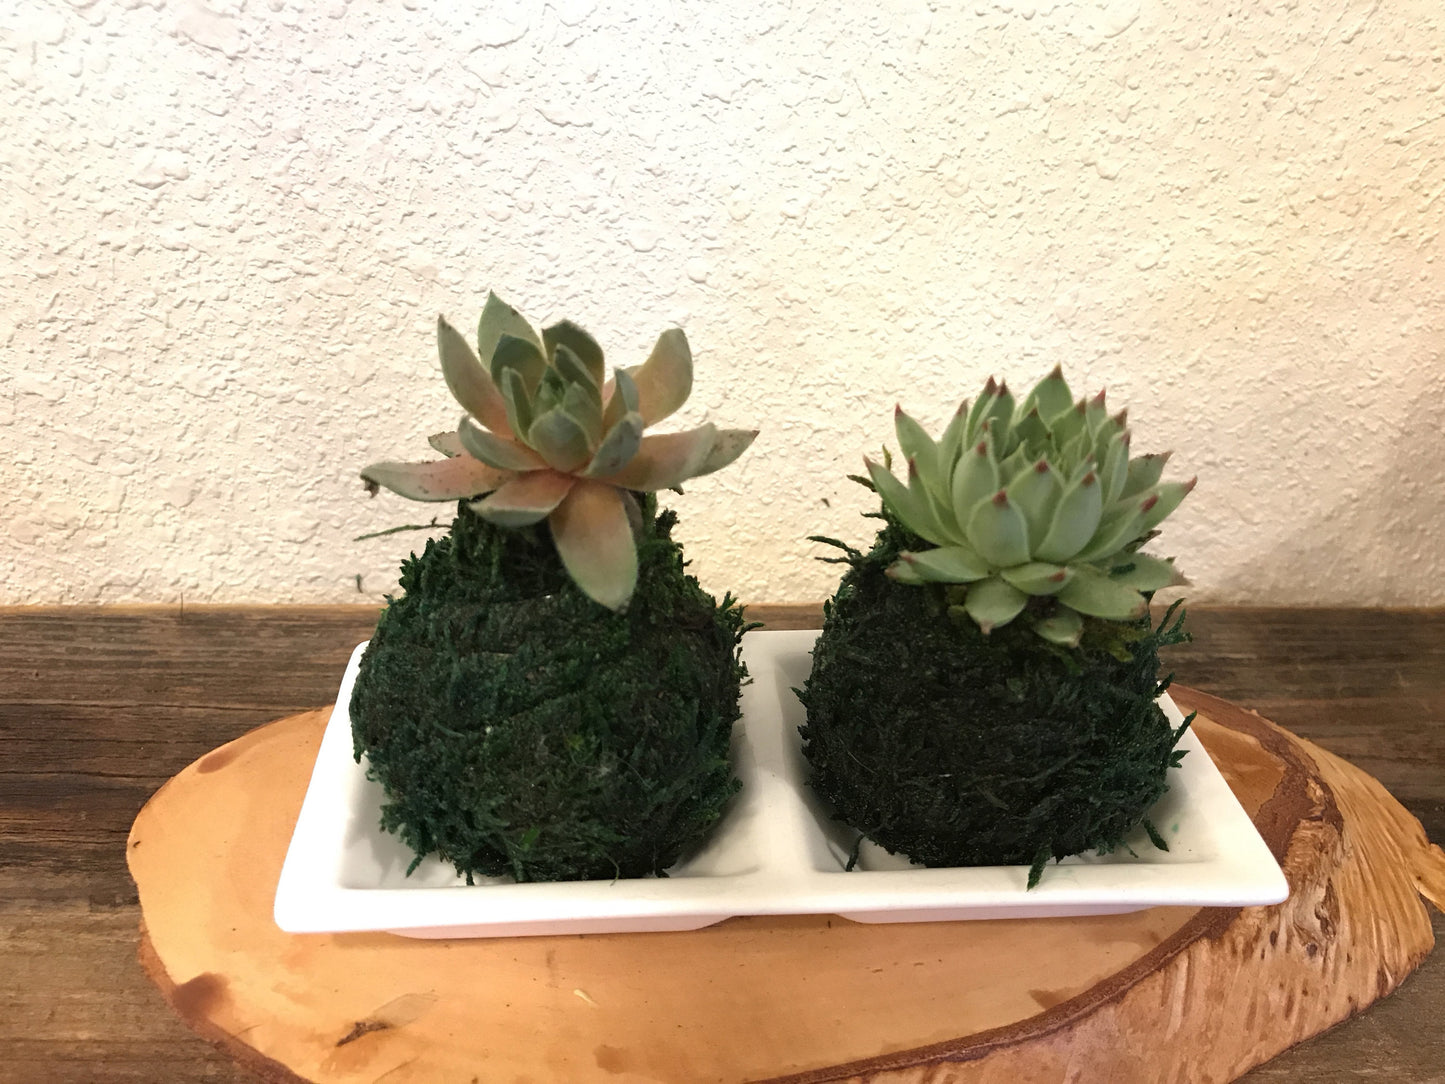 Mini succulents Kokedama - lowest price if you buy three! Available from one kokedama purchase.